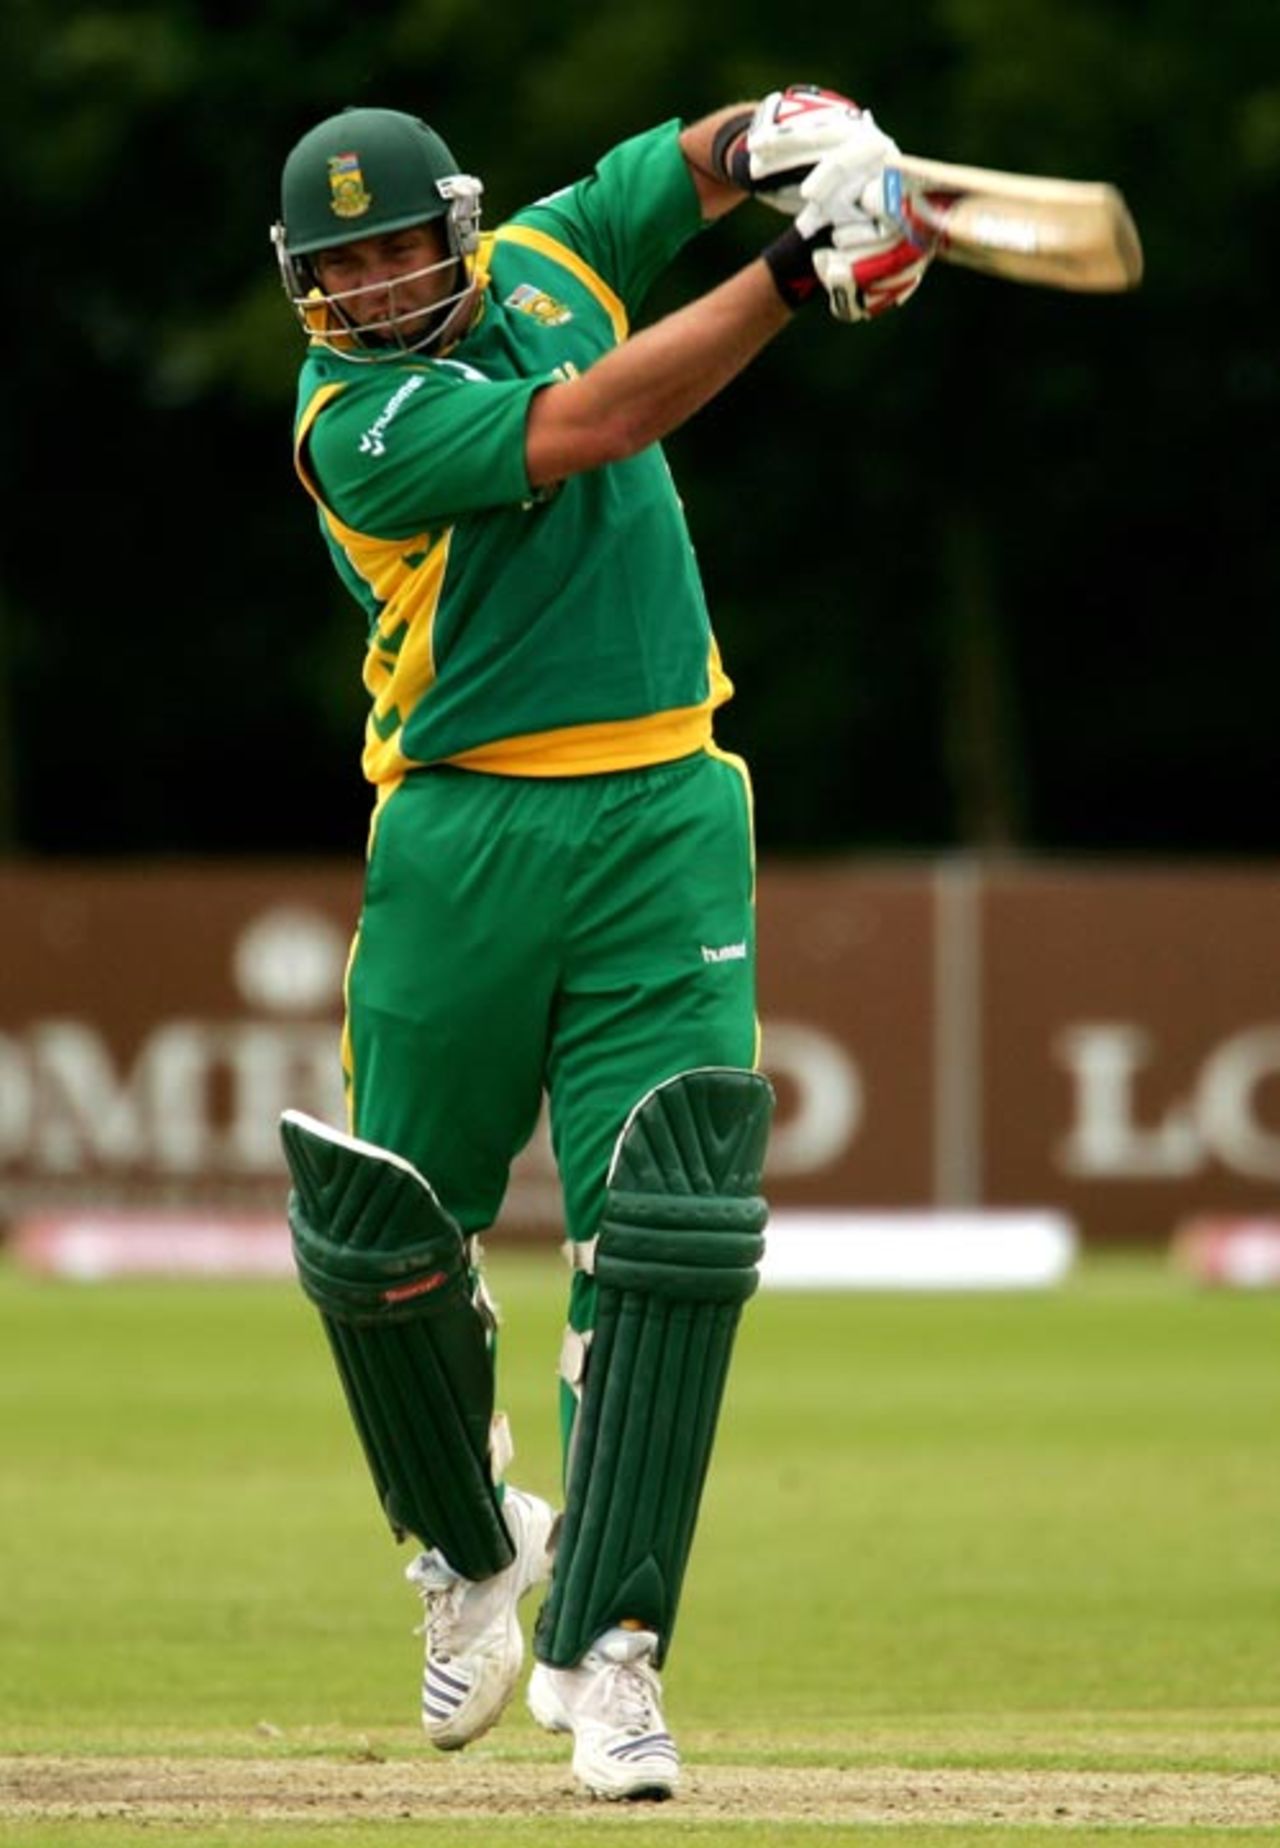 Jacques Kallis stands tall and punches one down the ground, India v South Africa, Civil Service Cricket Ground, Stormont, Belfast, Ireland, June 26, 2007